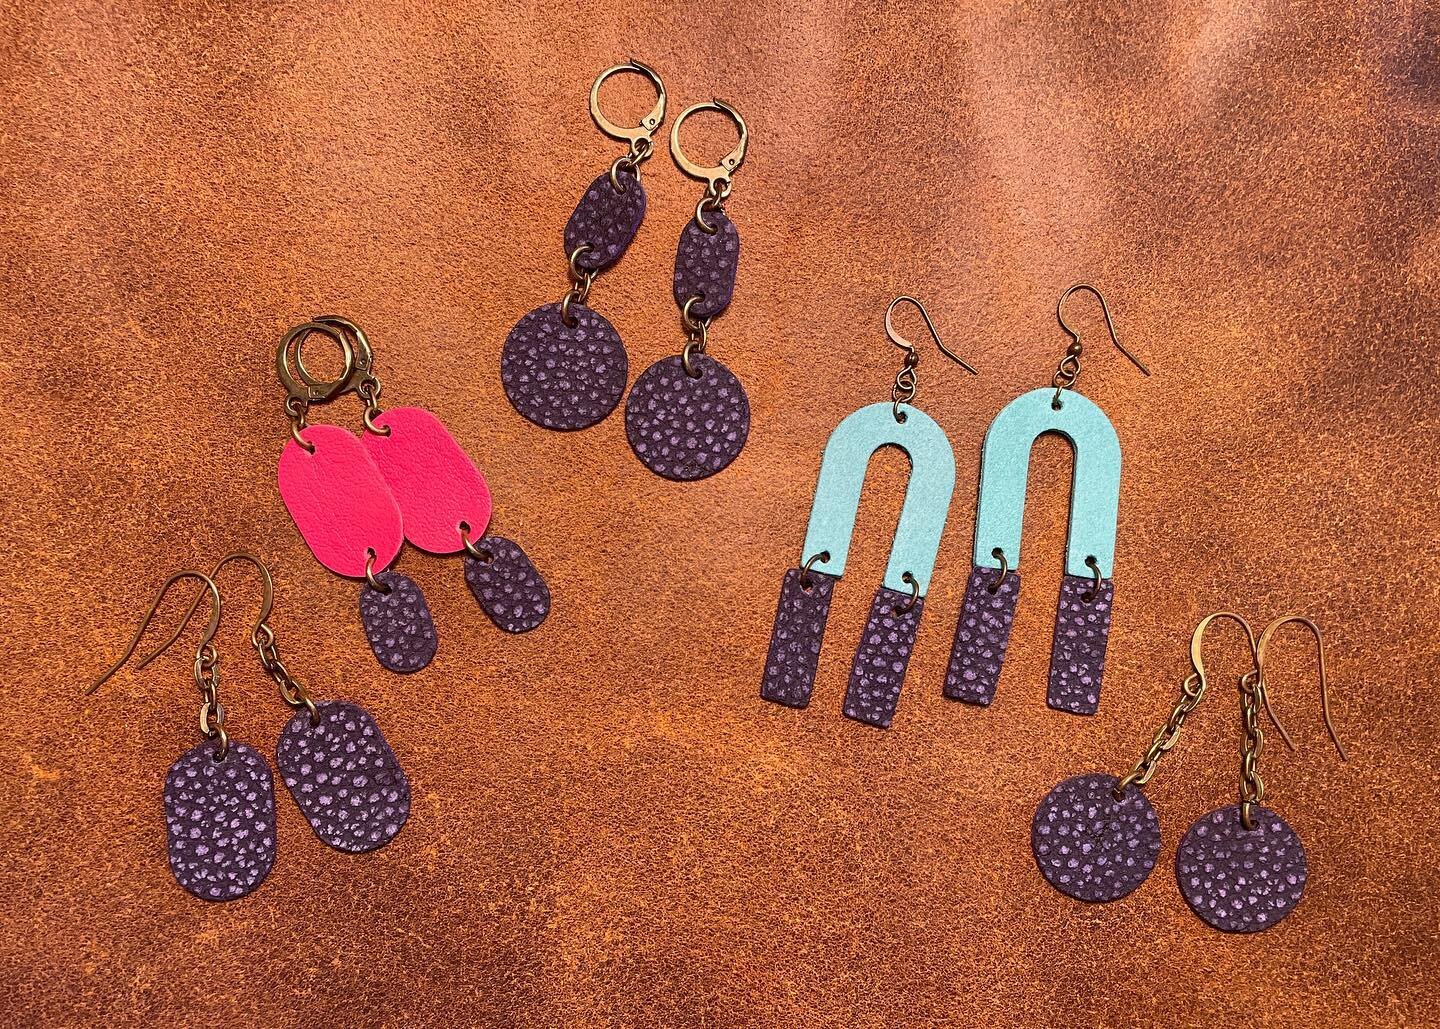 A small batch of earrings from a small leather sample [Summer Fun Collection]. Link in bio! Taxes and shipping are included in the price. @azzamarie_smith @make.do.goods 
.
.
.
#smallbatch #oneofakind #leatherearrings #earrings #lightweight #leather 